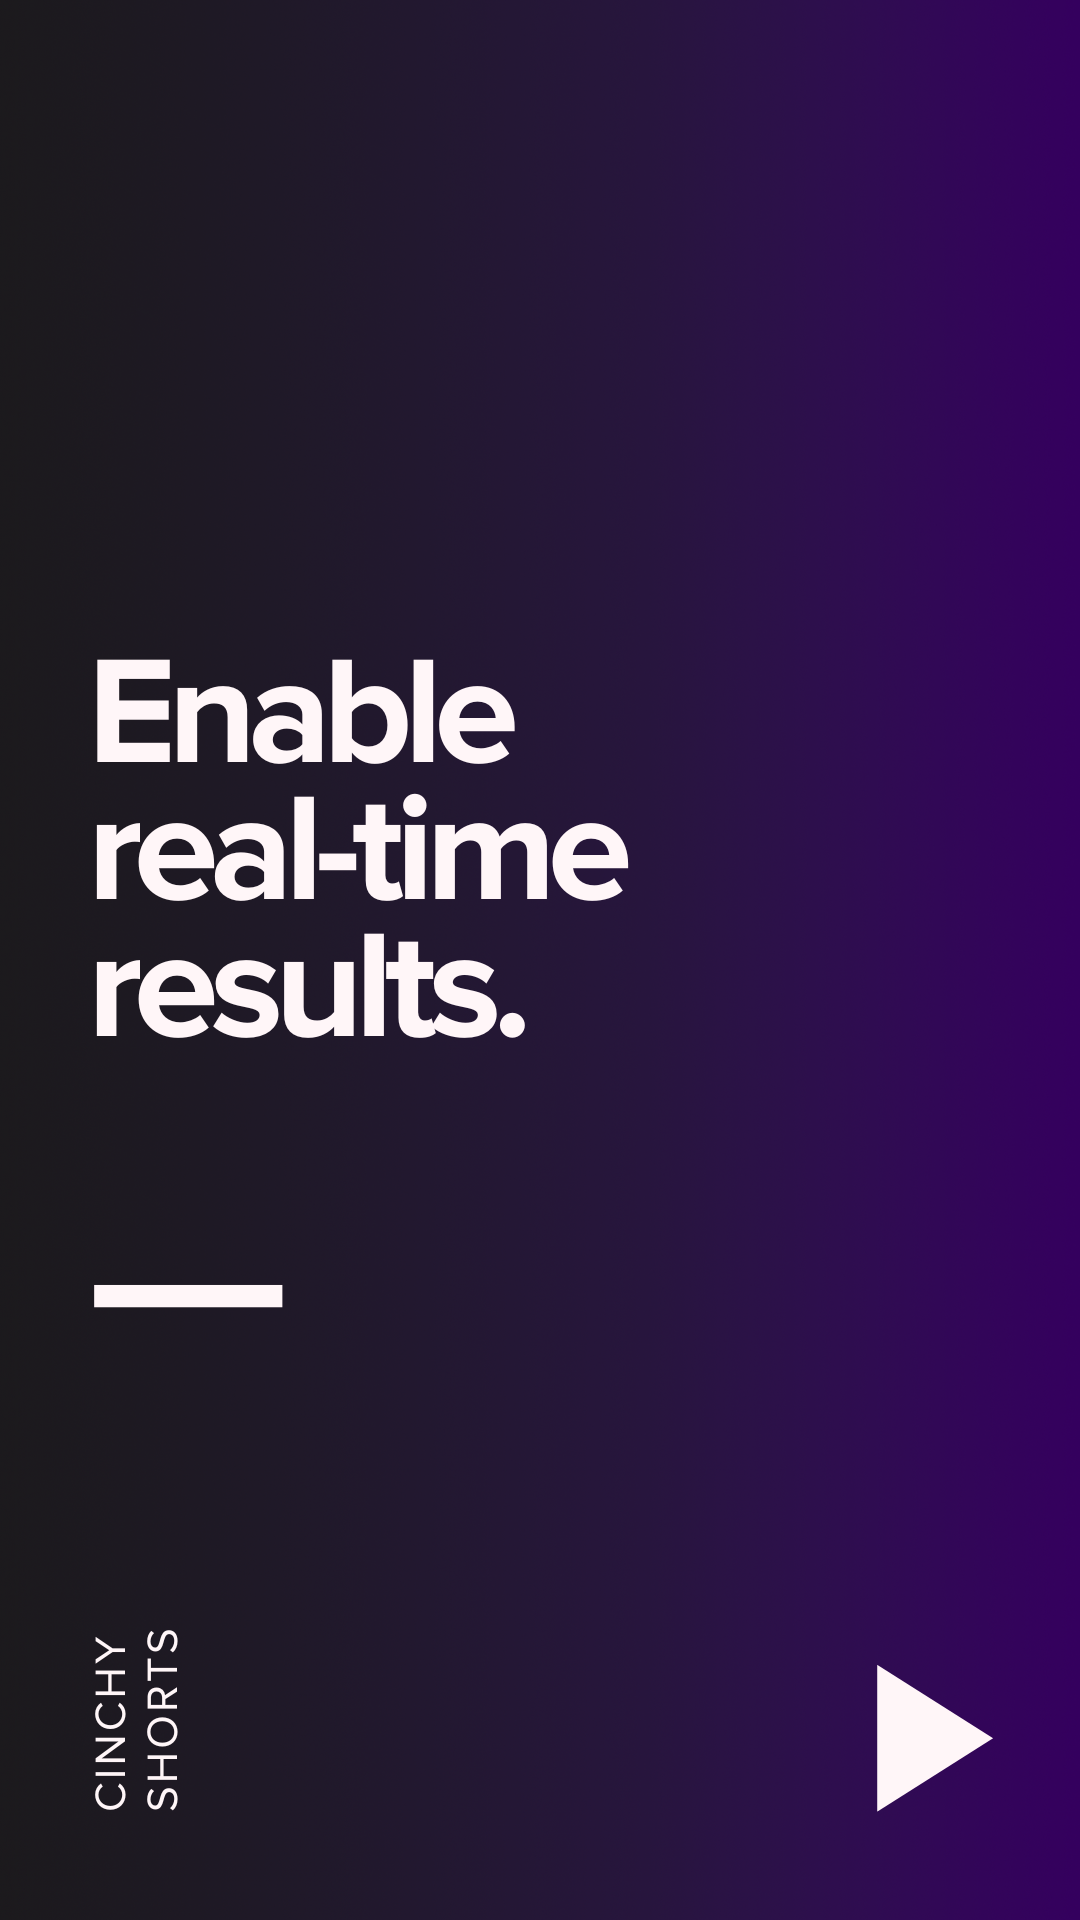 Enable real-time results.